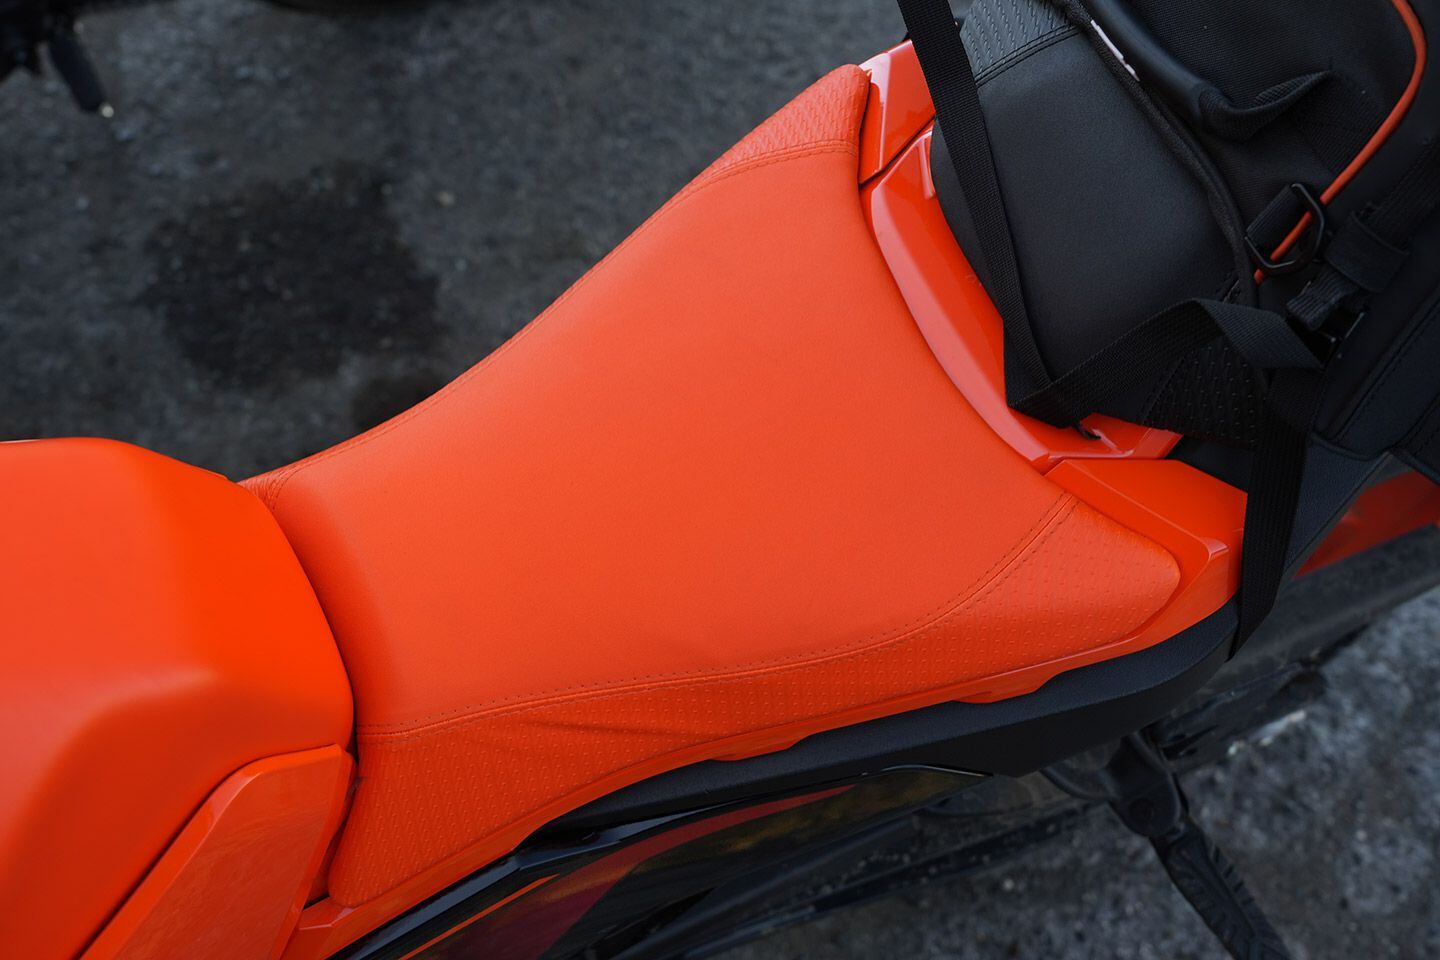 The rider’s seat looks nice, but it is thinly padded and one of the components we’d upgrade if the bike was ours.